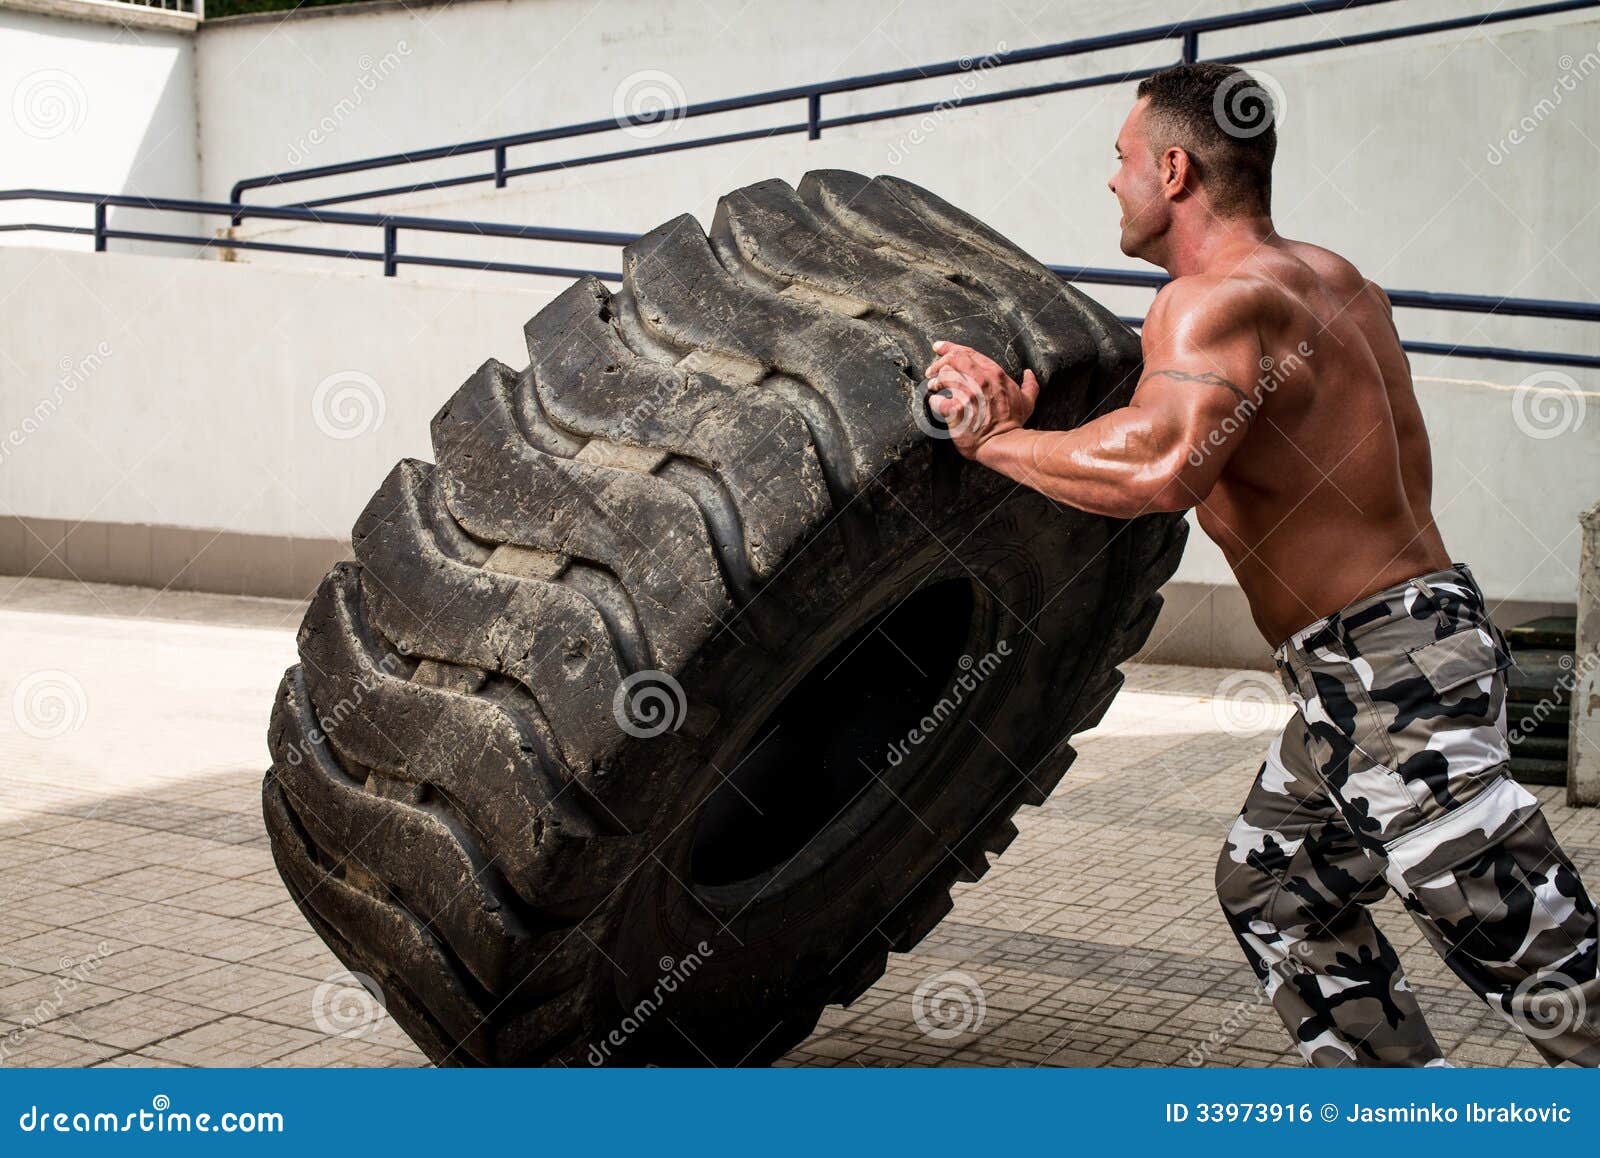 tire-workout-muscular-man-truck-doing-crossfit-style-turning-over-33973916.jpg